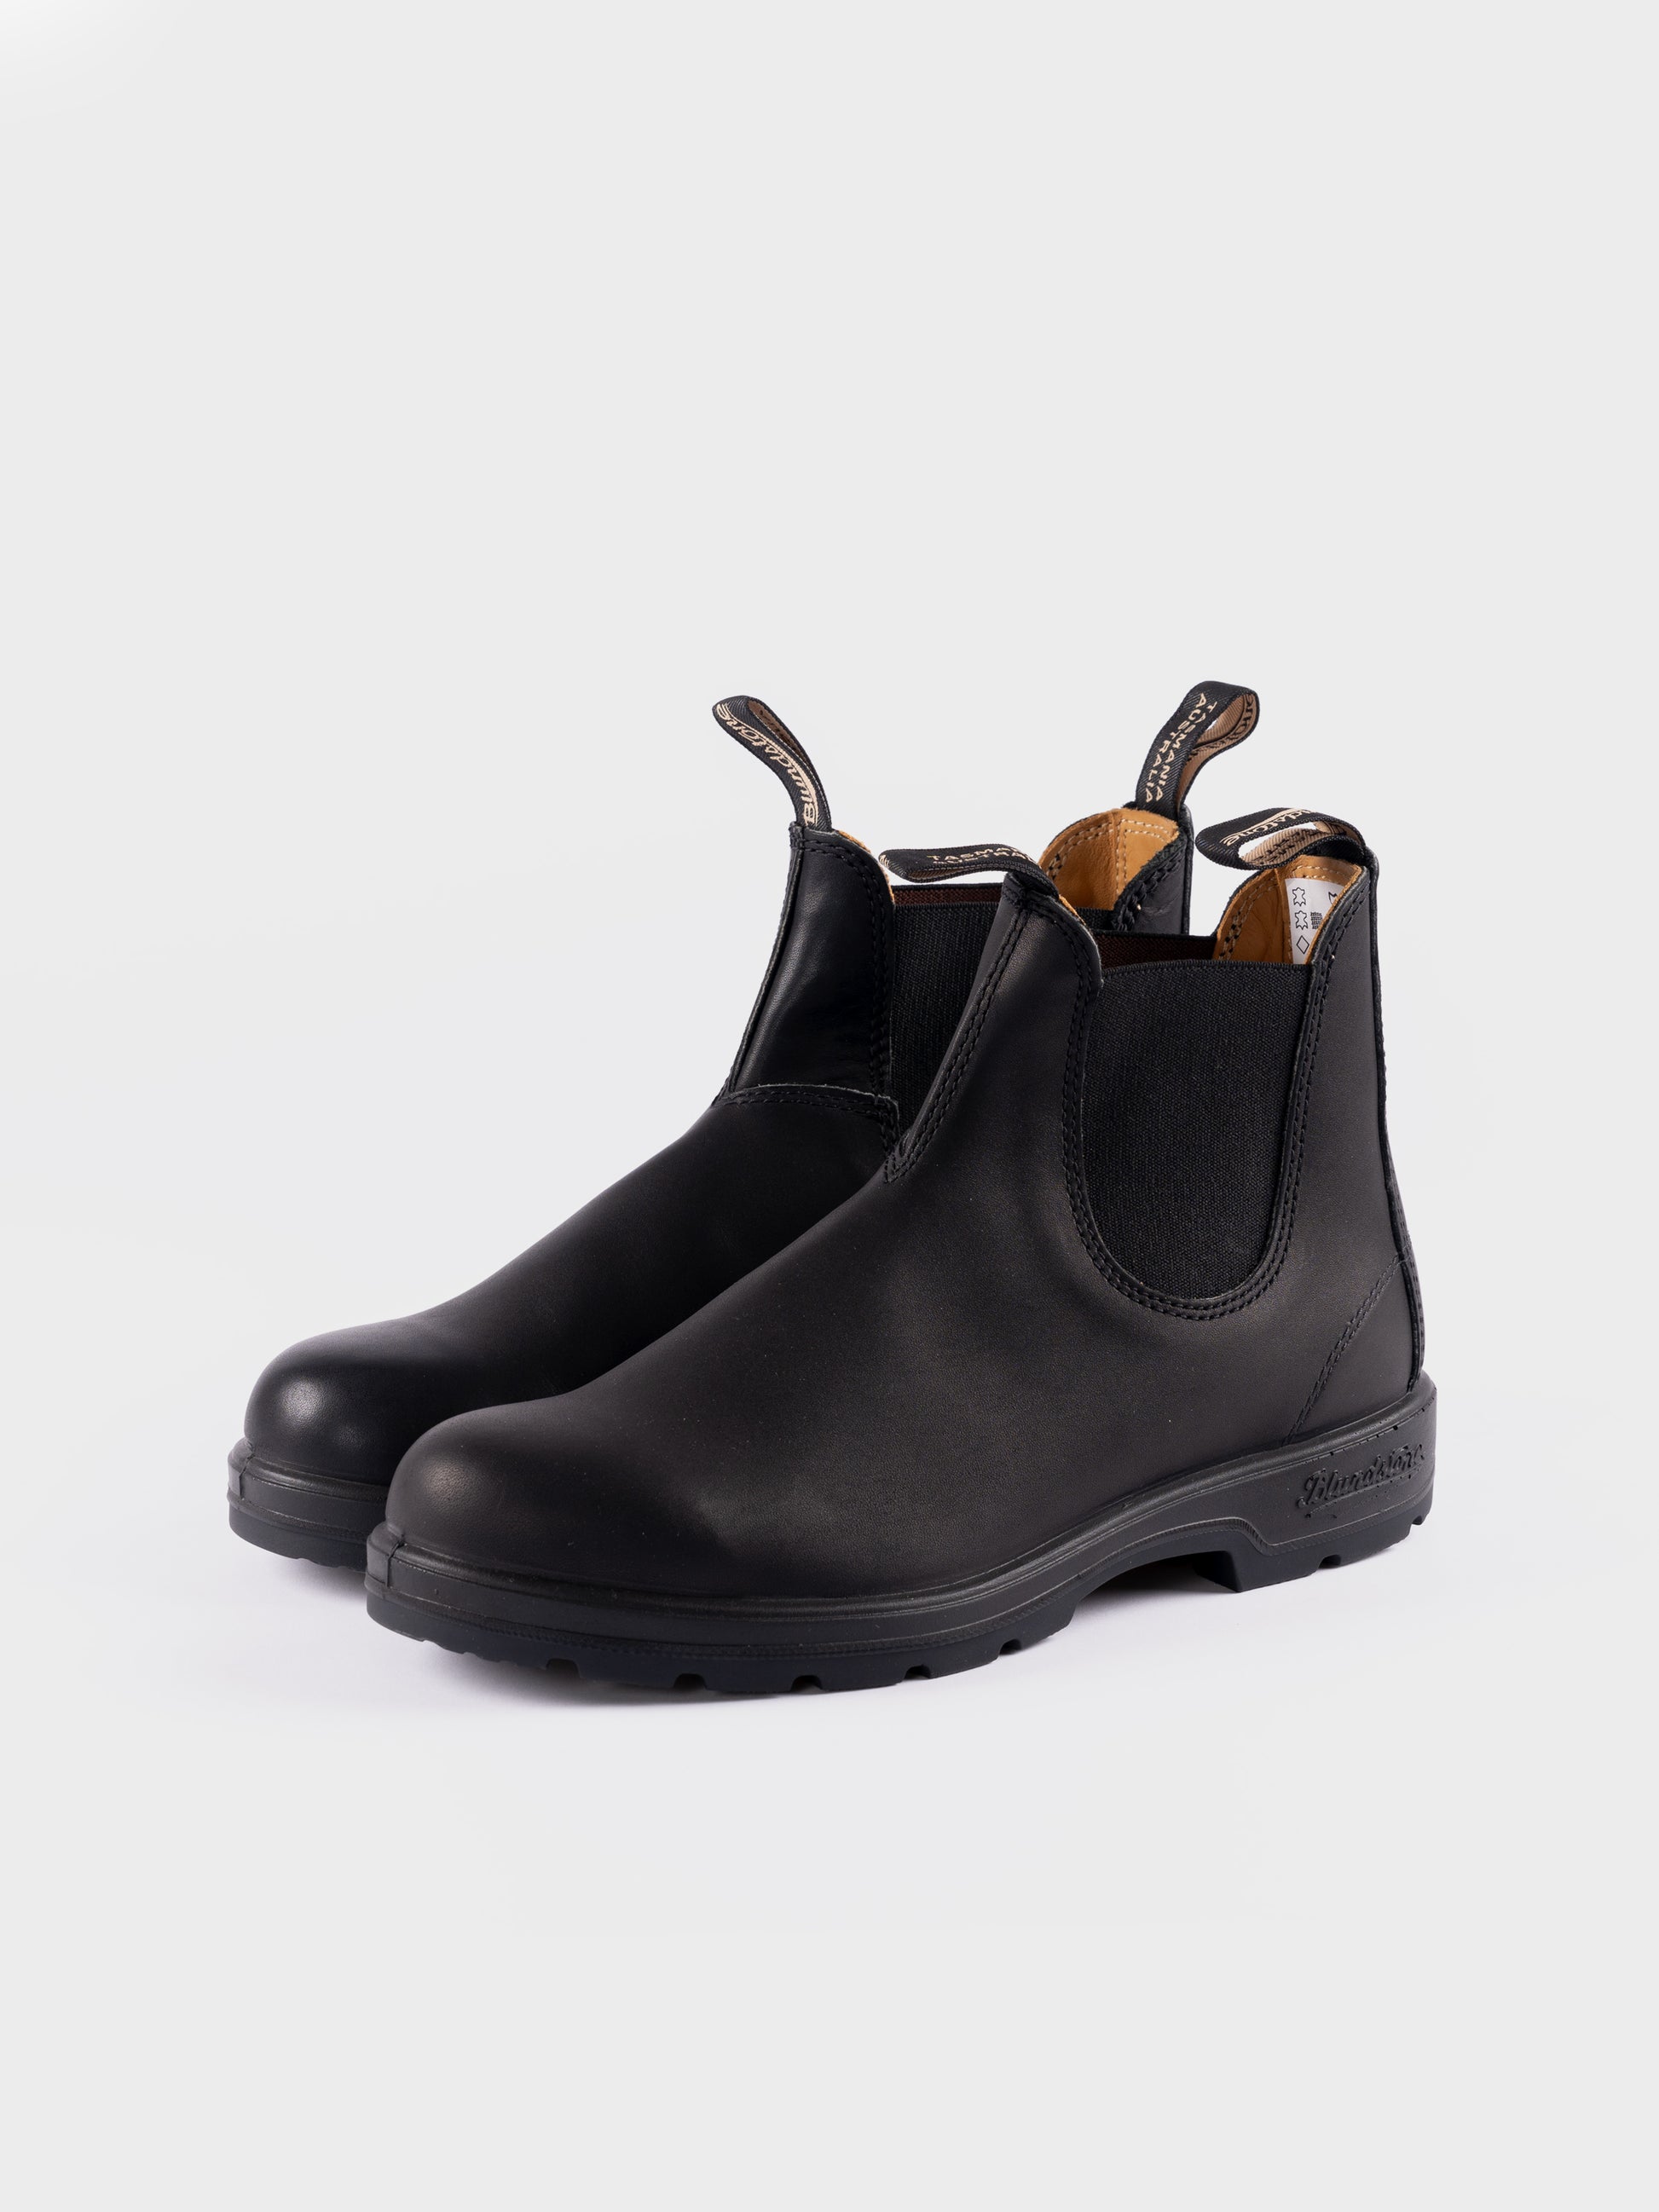 Blundstone Boots - 558 - Black Leather